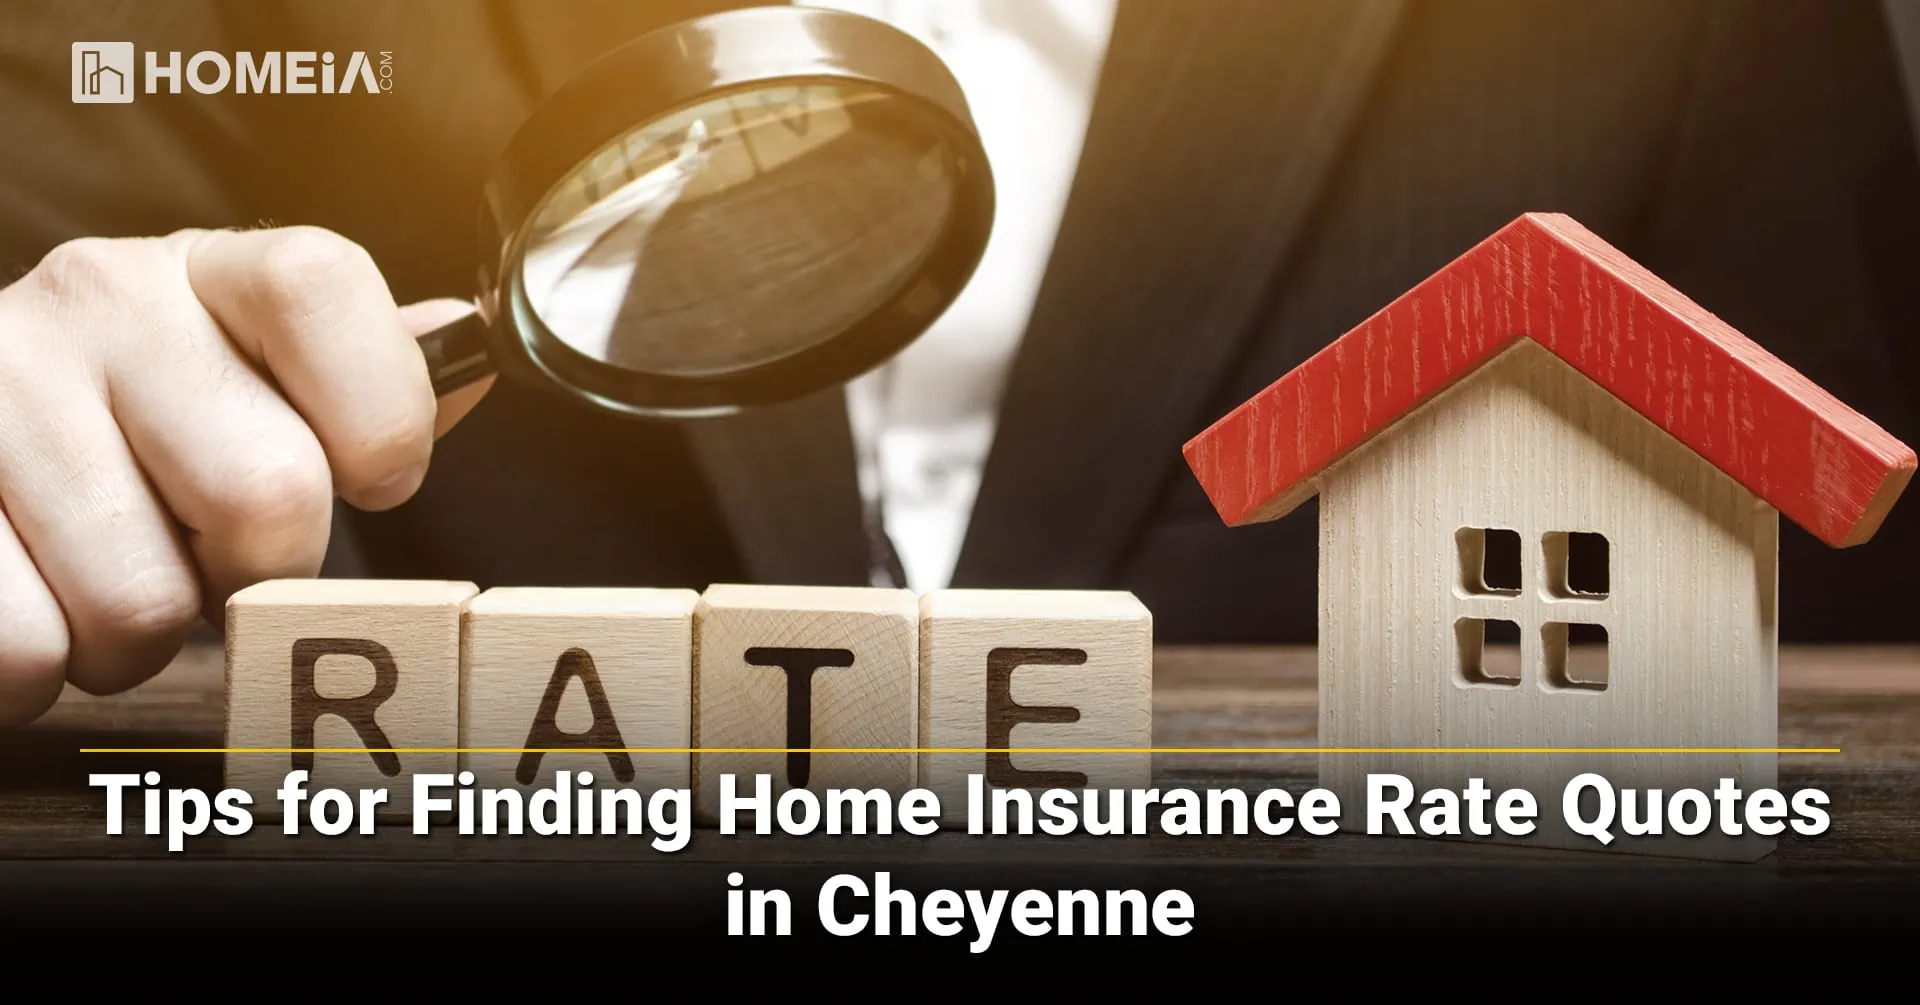 Tips for Finding Home Insurance Rate Quotes in Cheyenne